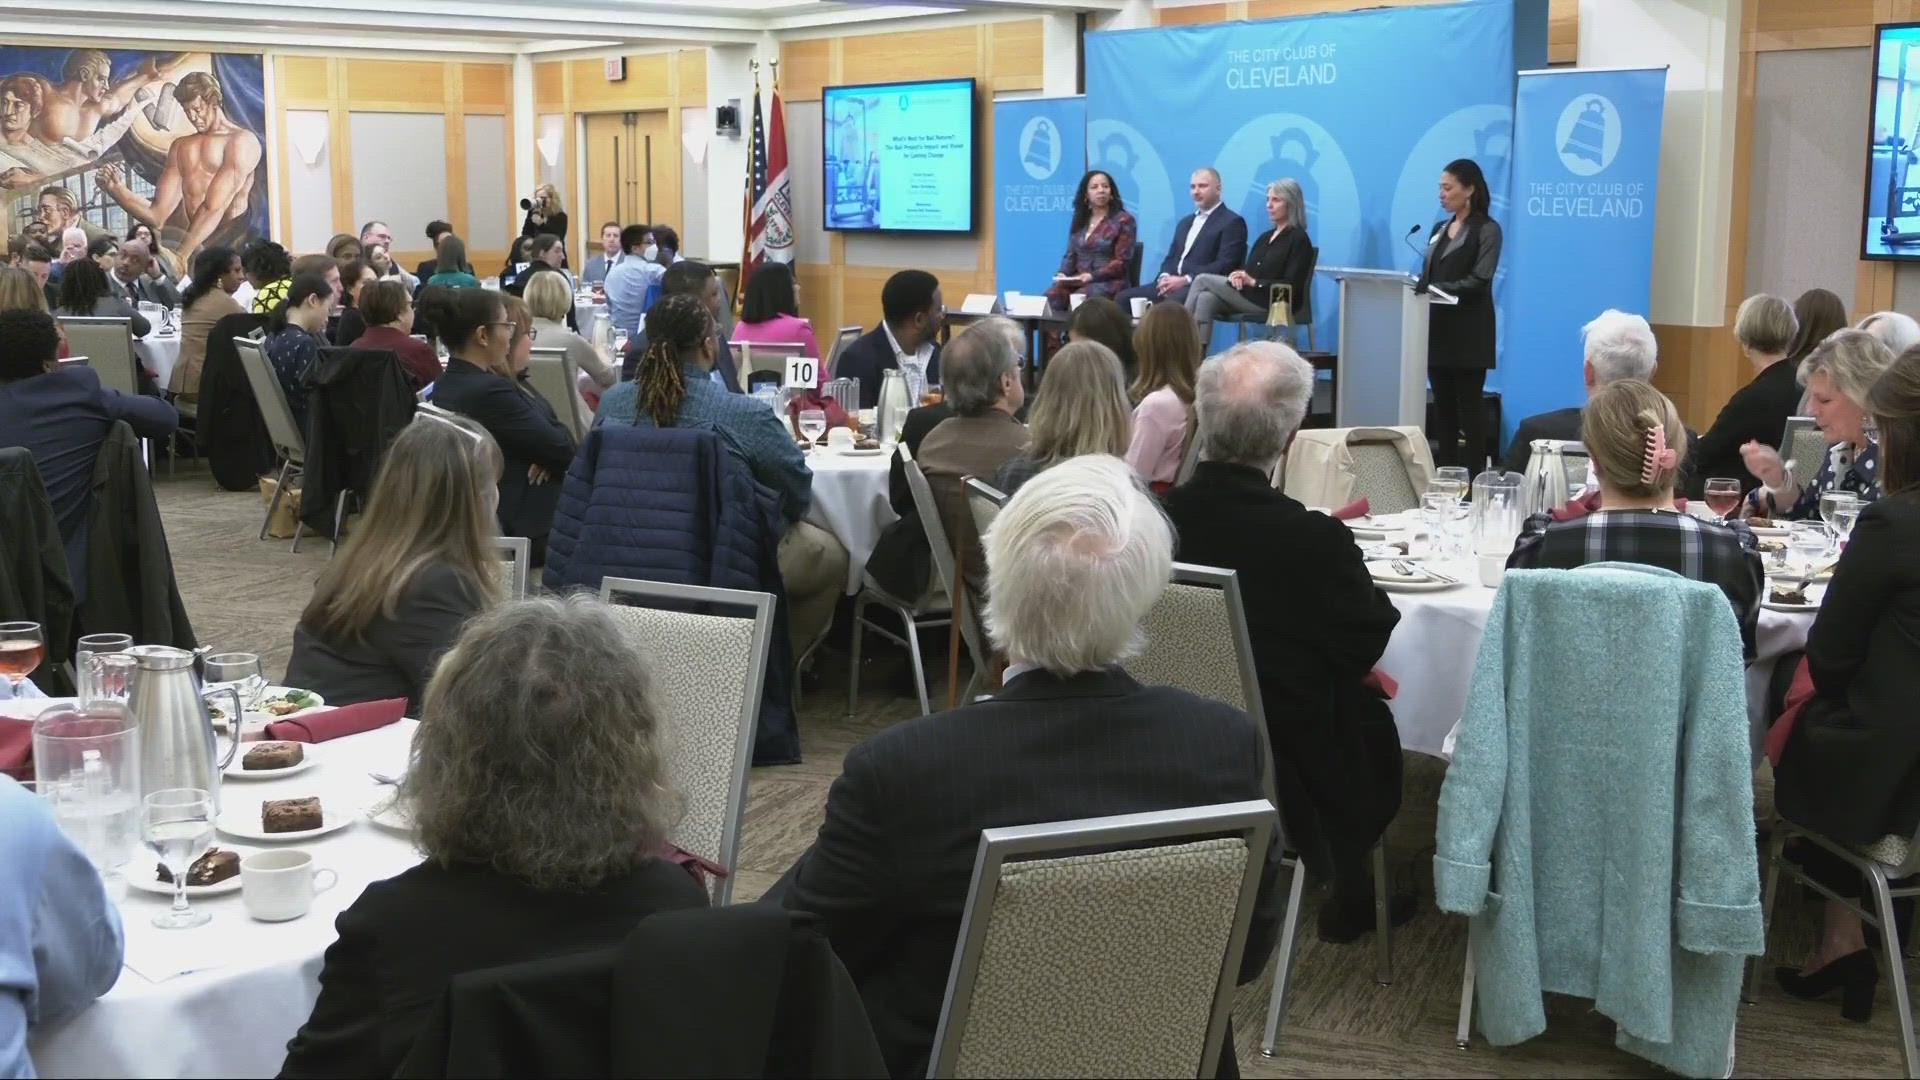 The City Club of Cleveland pledges to have open and free discussions about the problems that face our society.